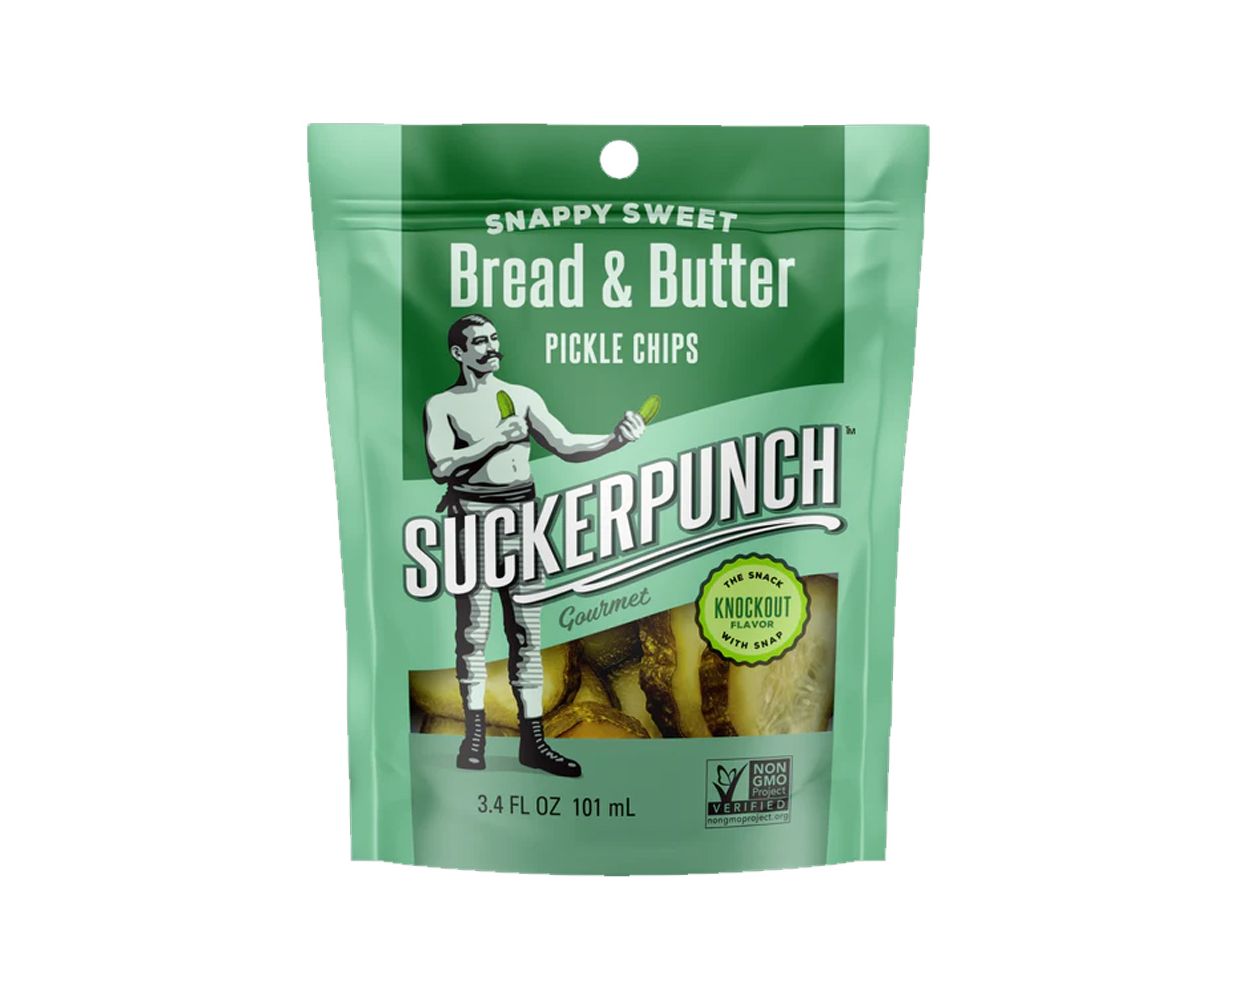 Pickles - Bread & Butter Chips Snack Pack from SuckerPunch | American Heritage